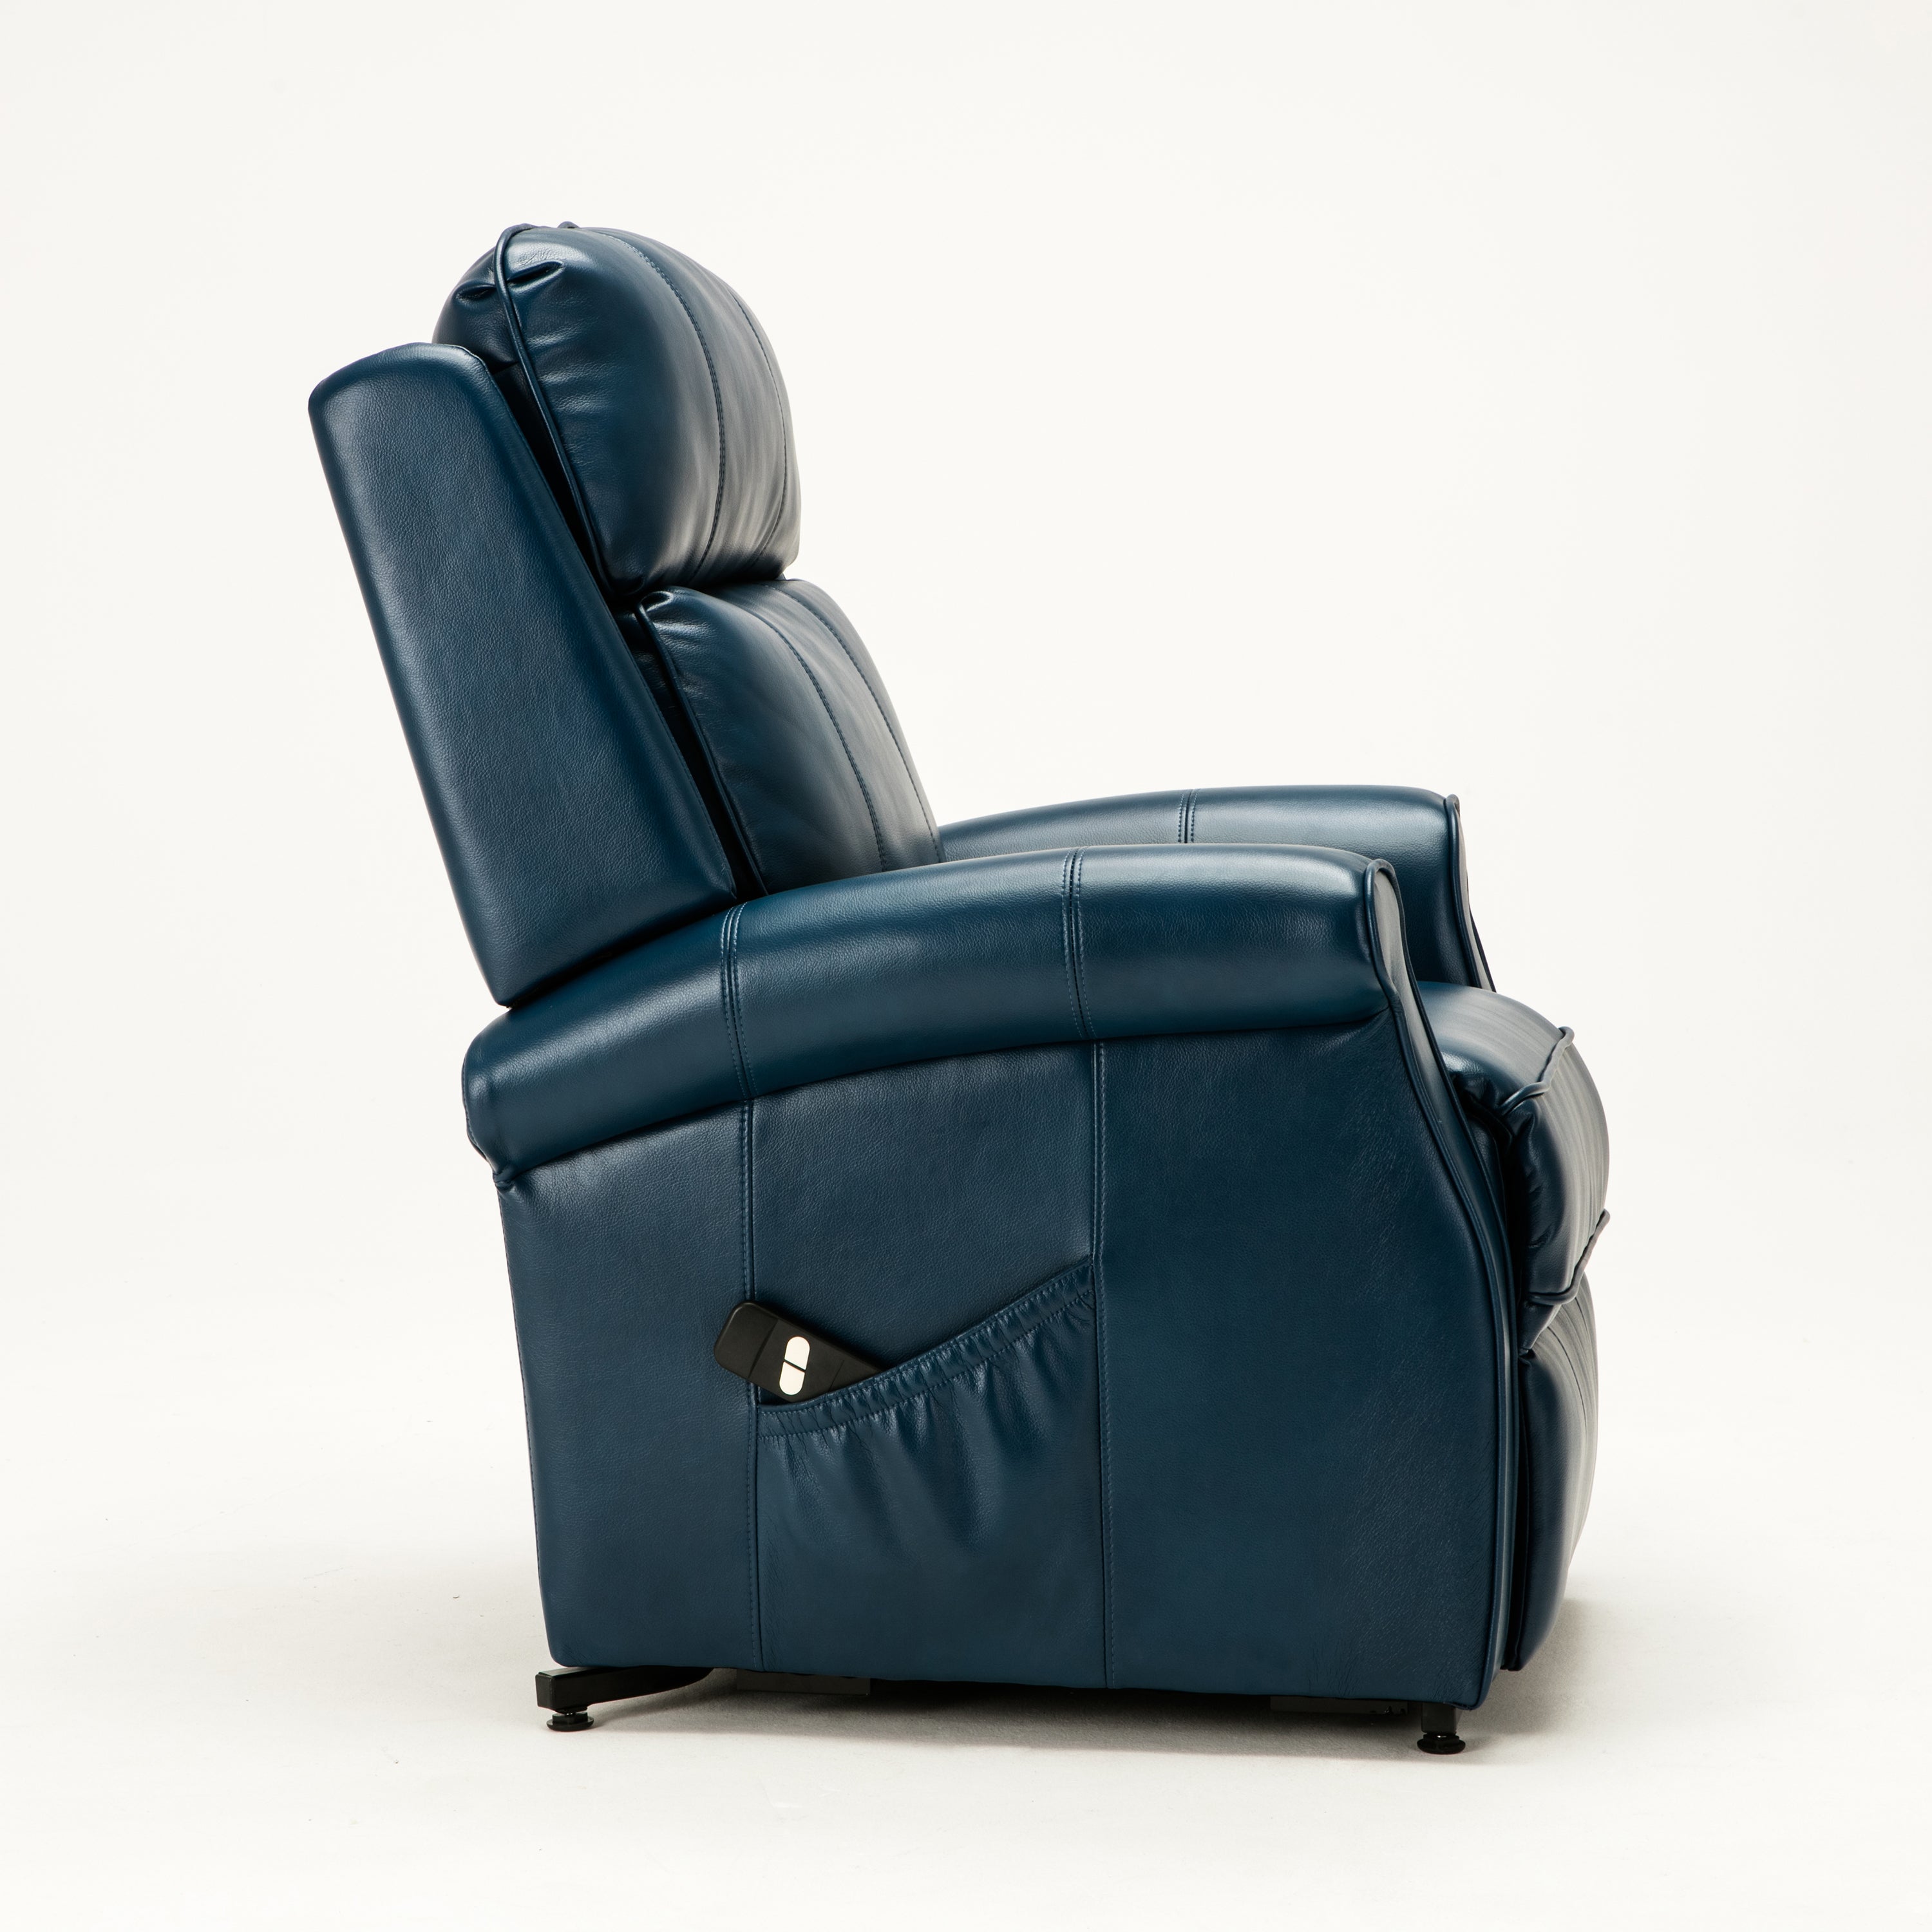 Landis Chair Navy Blue Lift Chair Recliner, side view